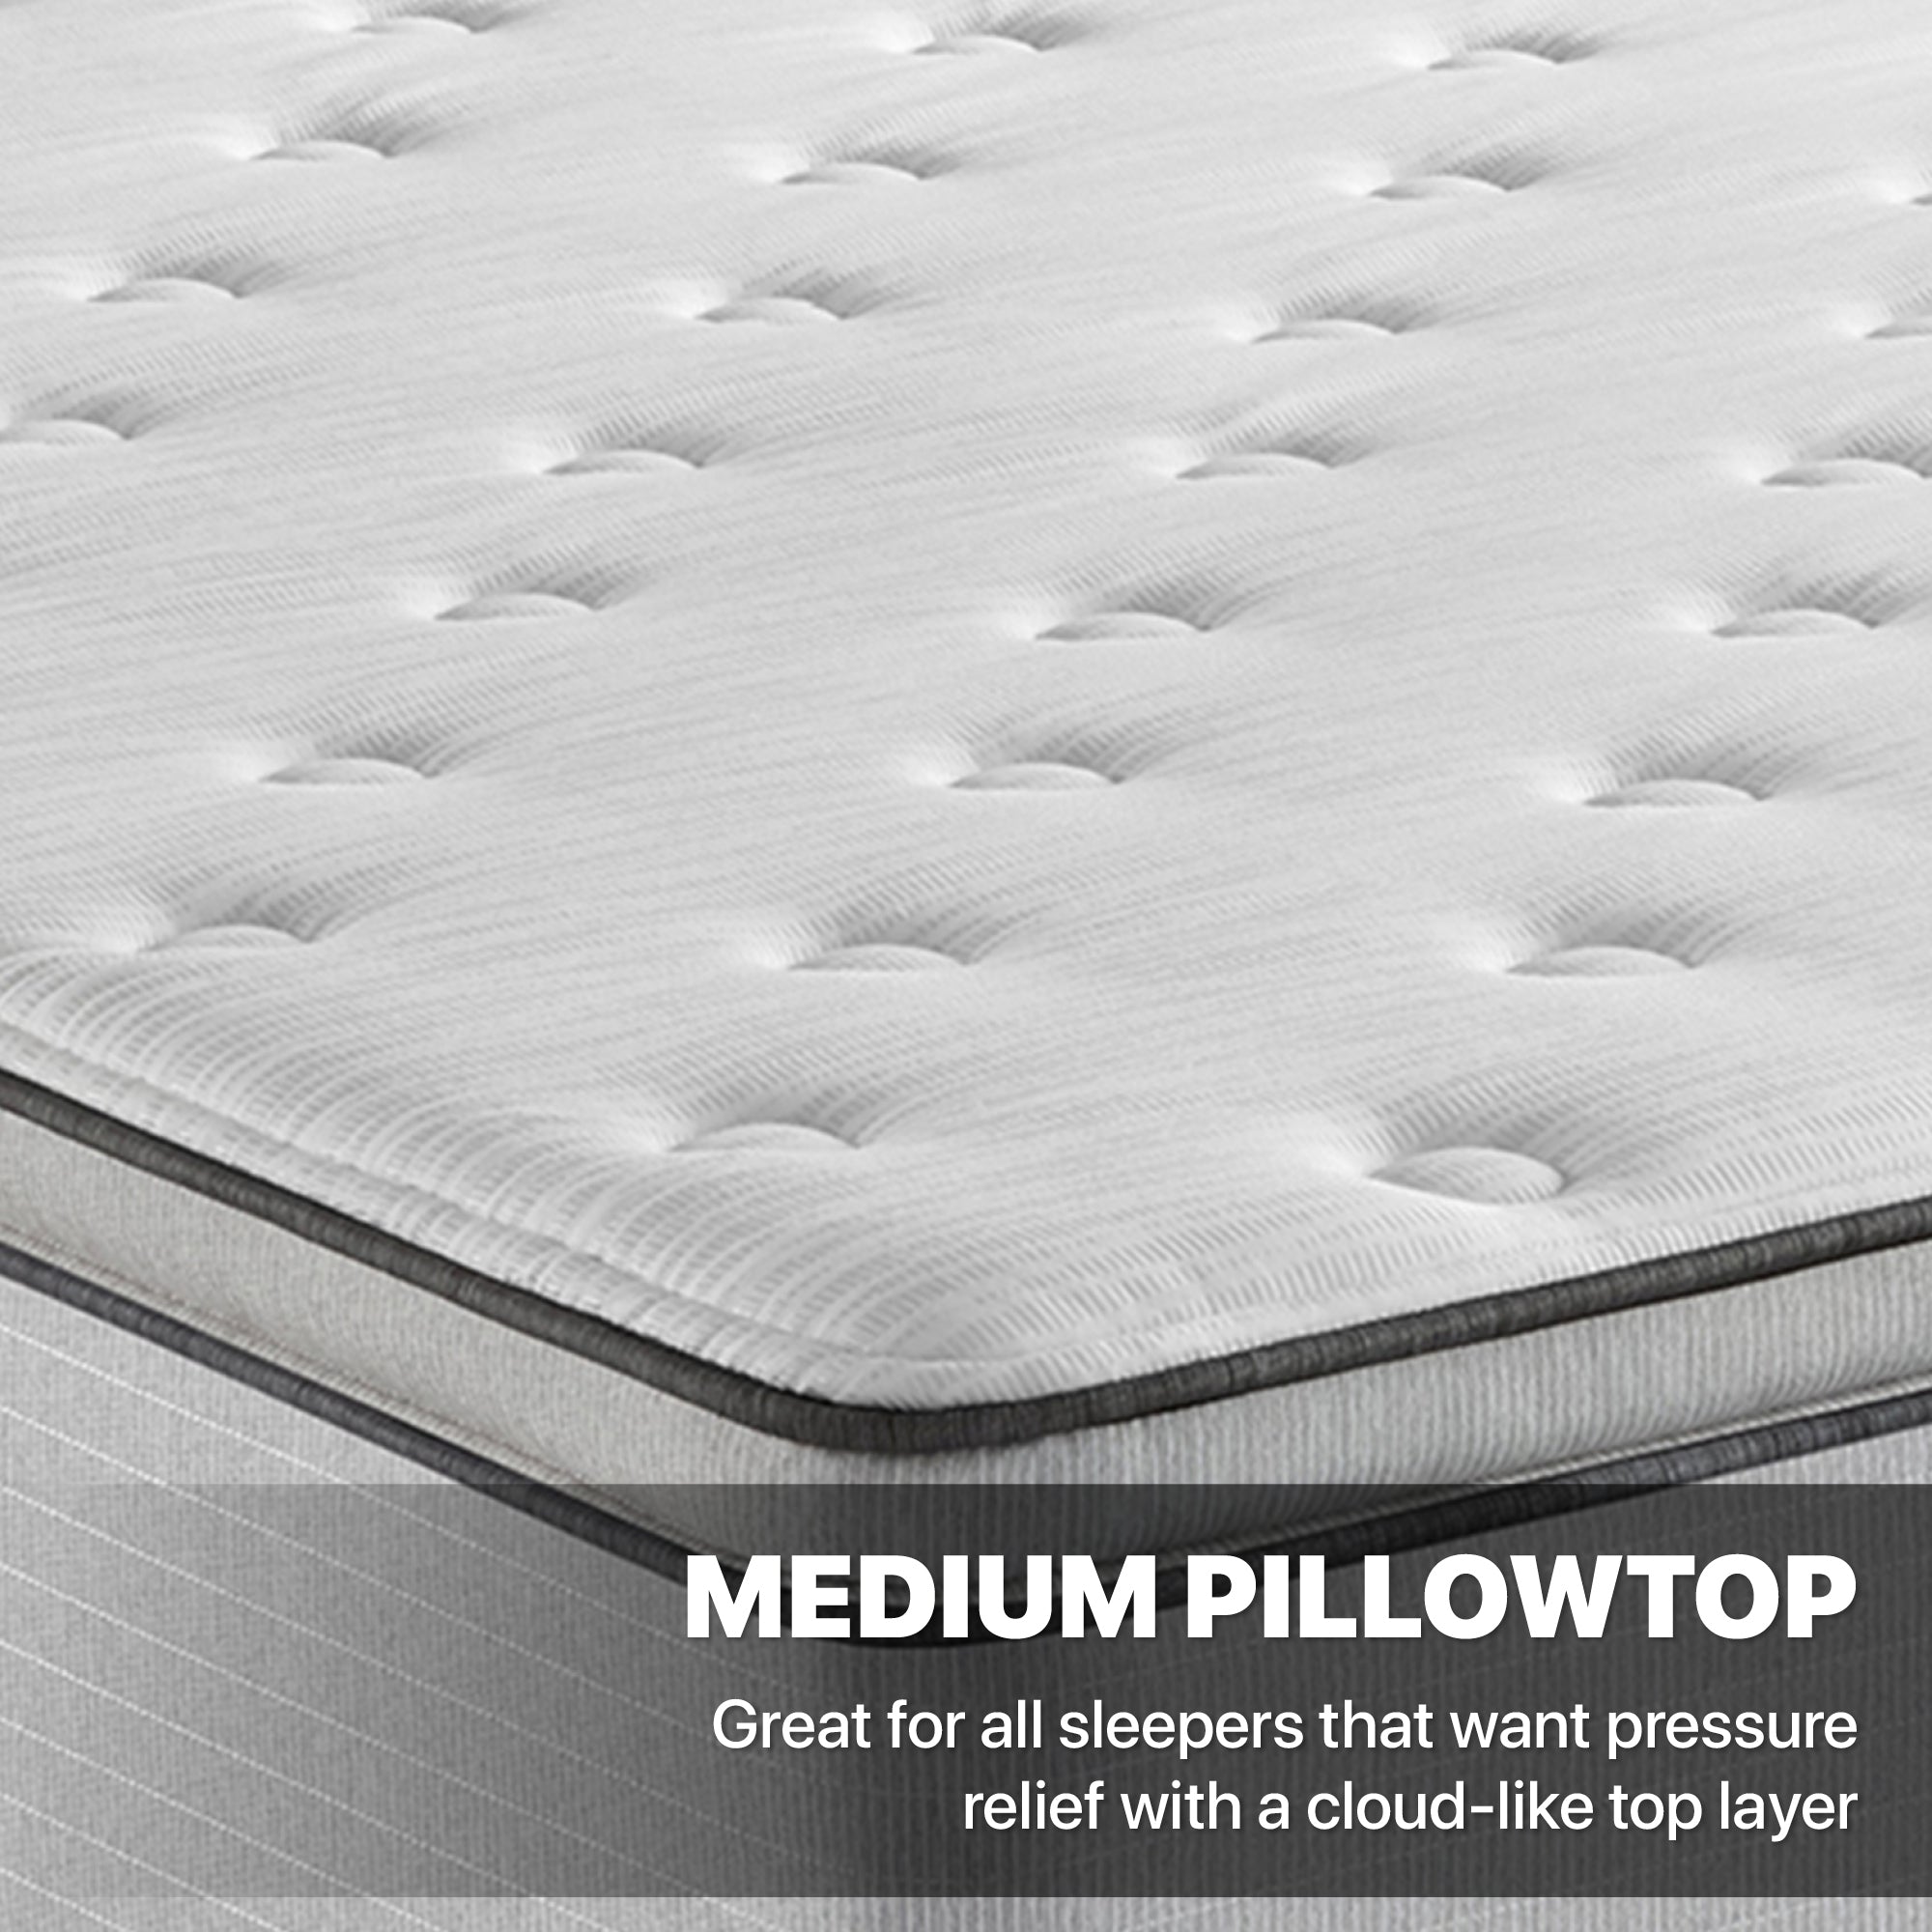 Close-up view of the material on the Beautyrest BR800 Medium Pillow Top mattress